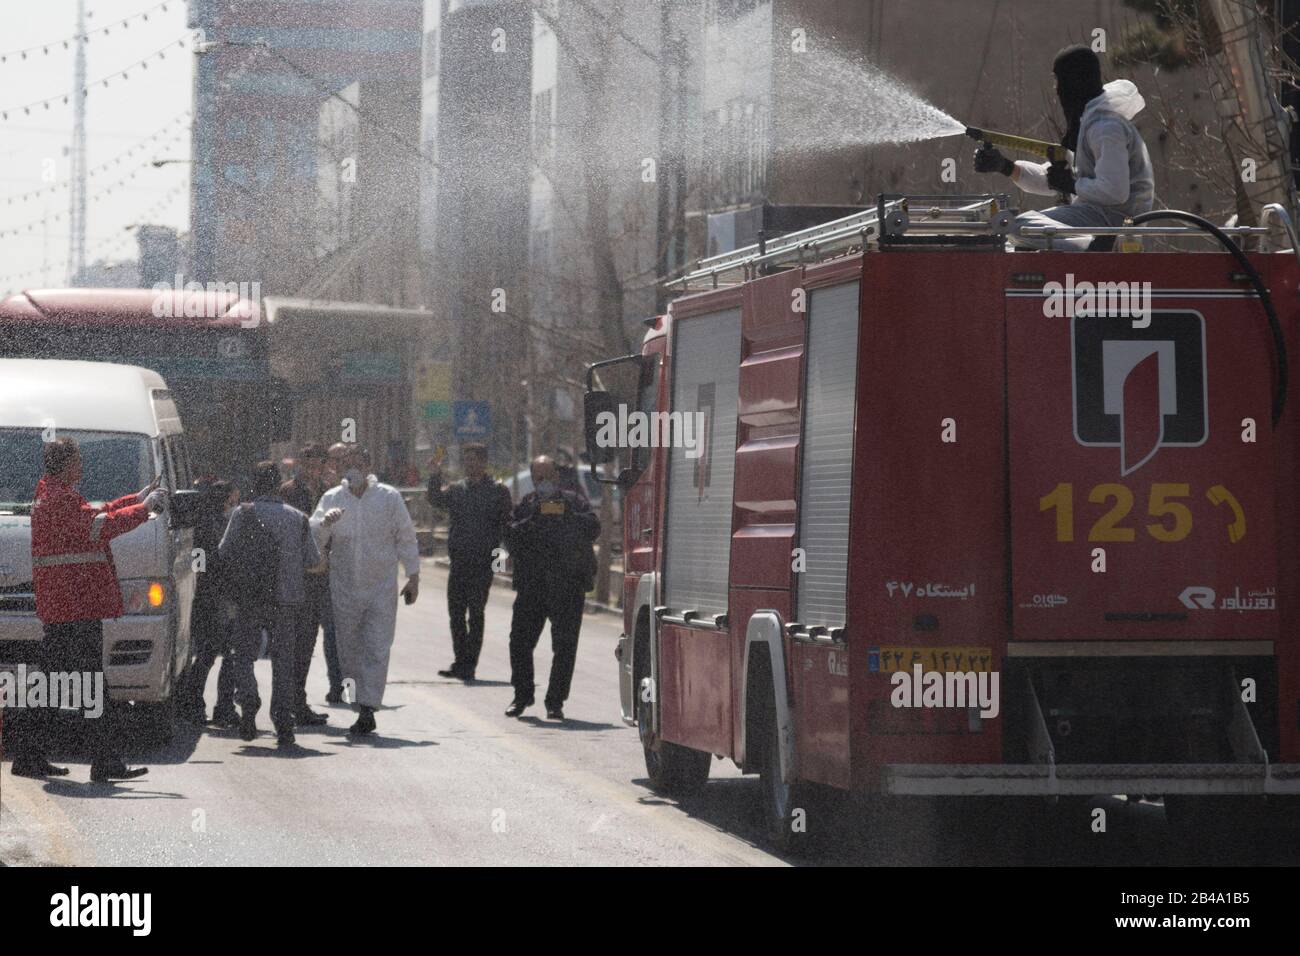 Tehran, Iran. 6th Mar, 2020. Firefighters and municipality workers with protective suits disinfect the streets, buses, and taxies as a precaution to the coronavirus (Covid-19) in Vanak square of northern Tehran, Iran. Iranian officials canceled Friday prayer for the second week due to concerns over the spread of coronavirus and COVID-19. According to the last report by the Ministry of Health, there are 4,747 COVID-19 cases in Iran. 147 people have died so far. A Health Ministry spokesman warned authorities could use unspecified 'force' to halt travel between major cities. (Credit Image: © Ro Stock Photo